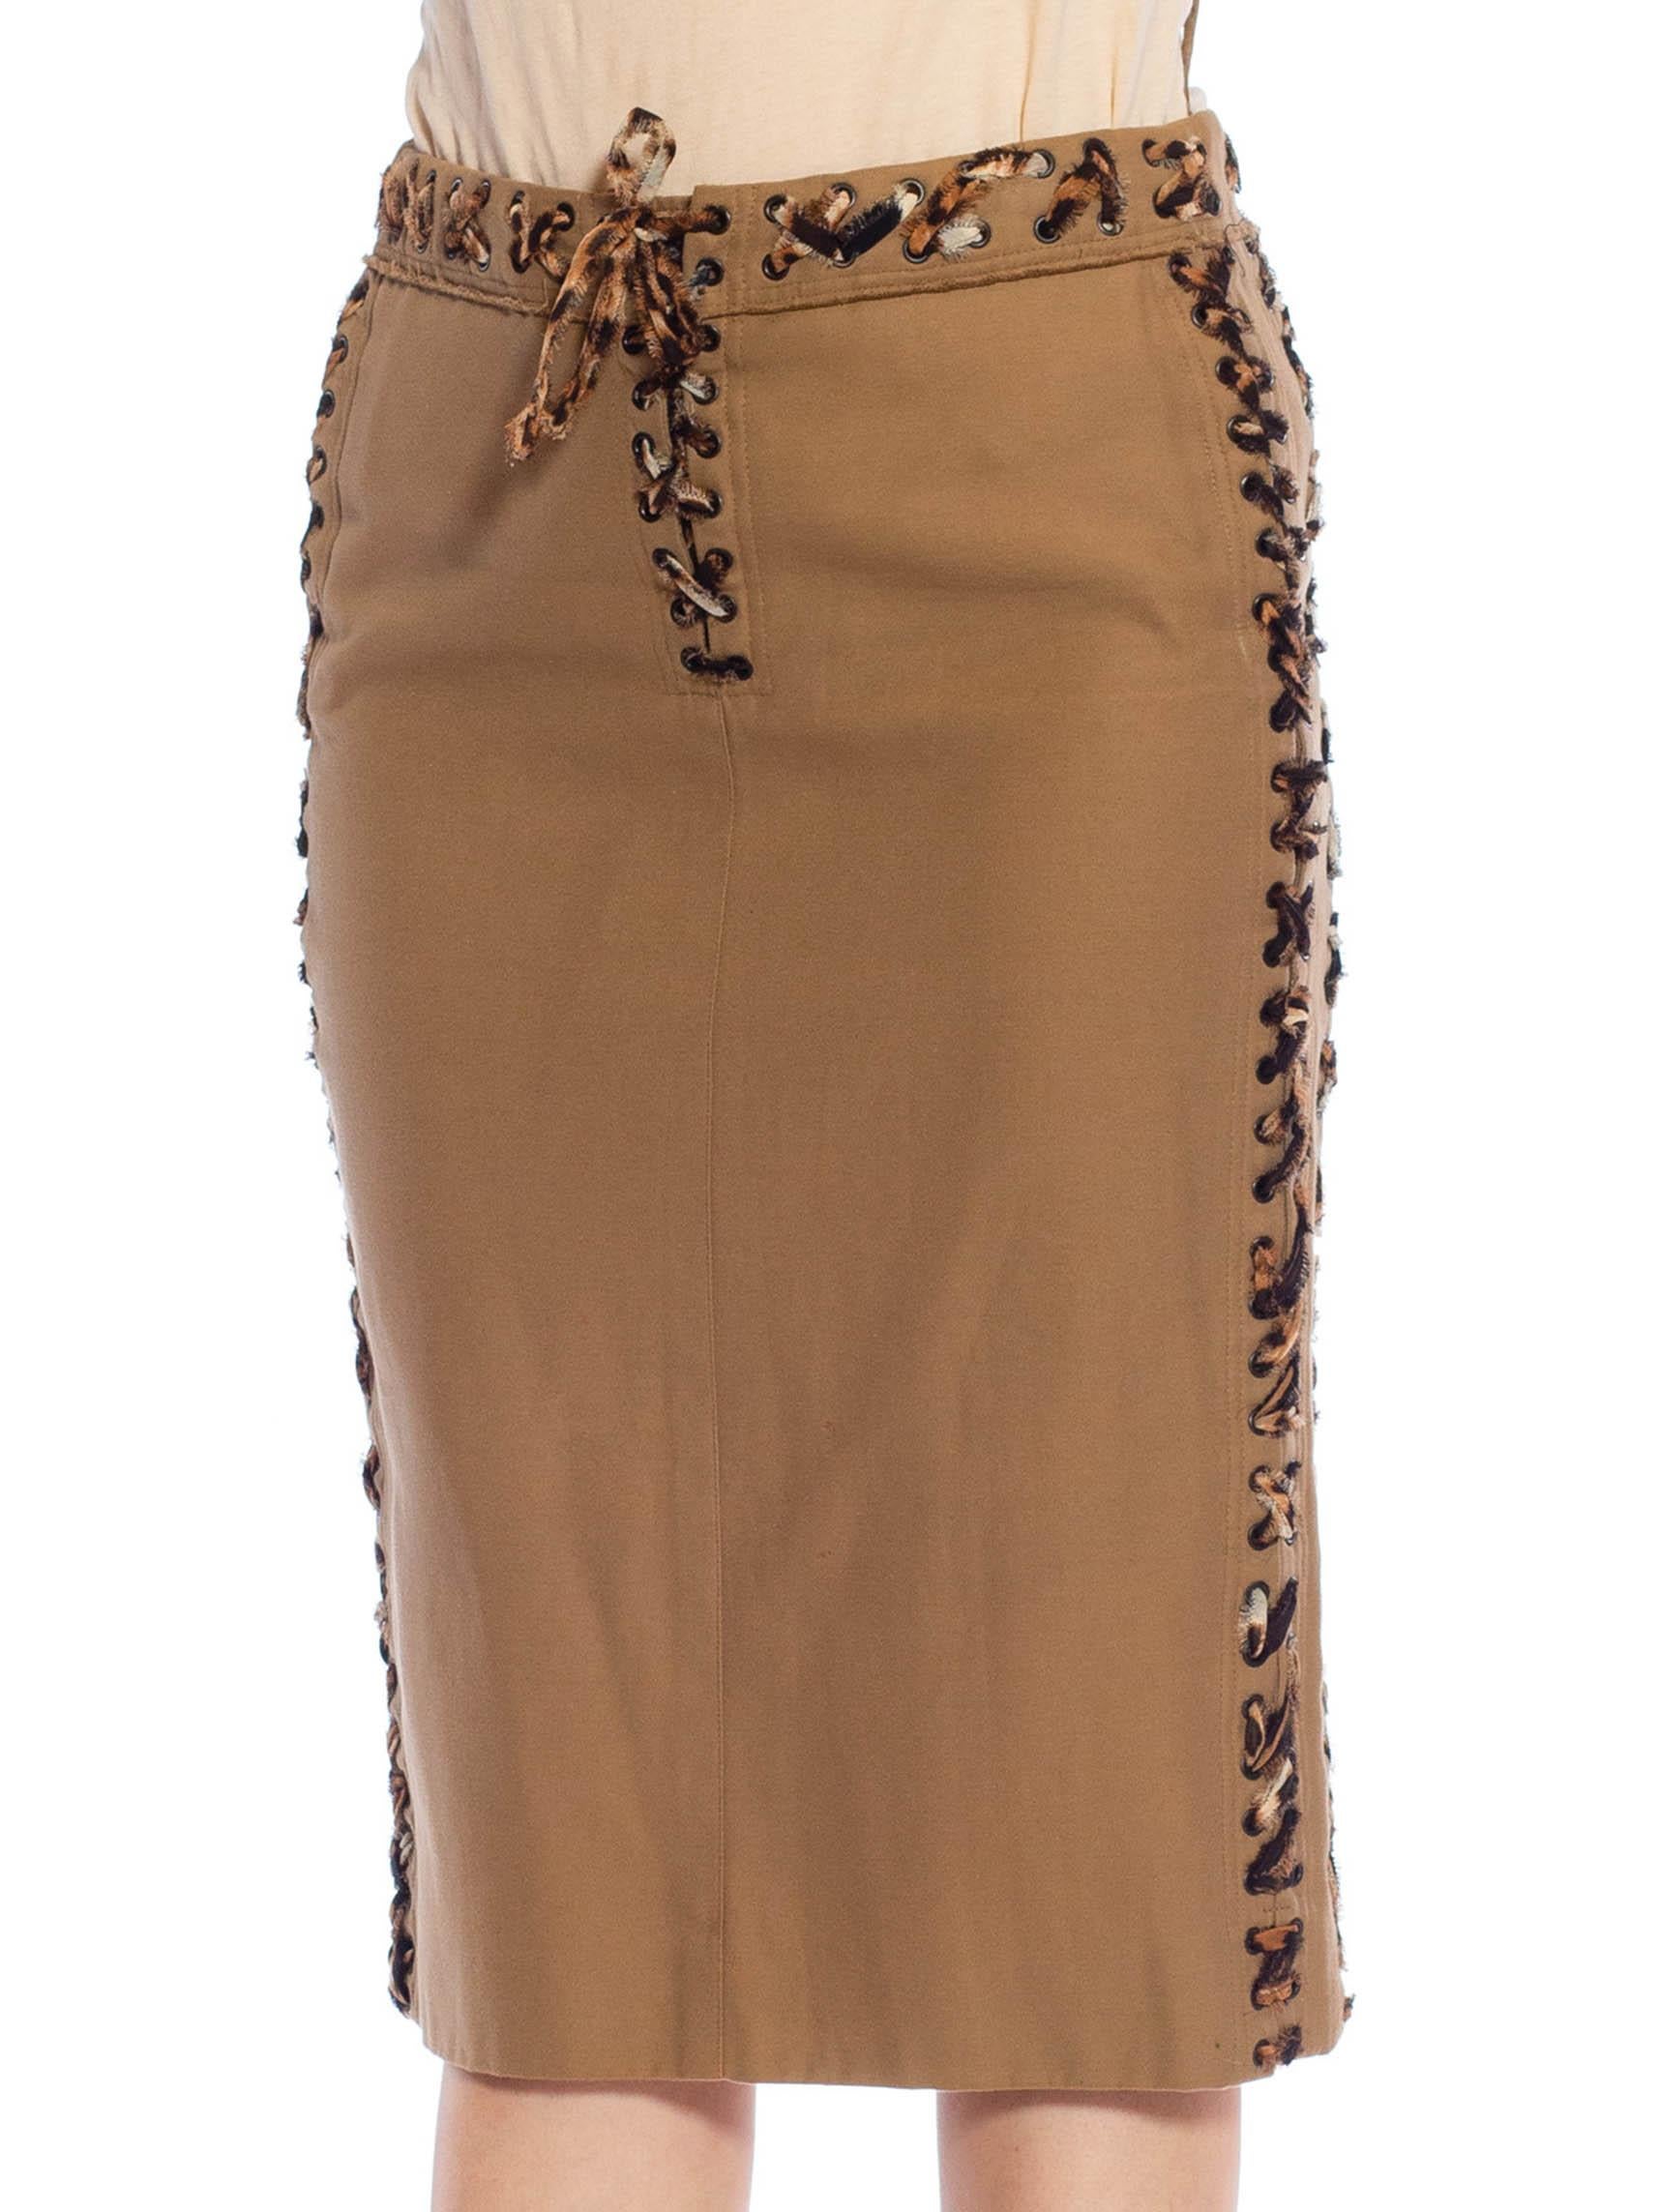 2000S YVES SAINT LAURENT Brown Cotton Tom Ford Safari Collection Skirt For Sale 1